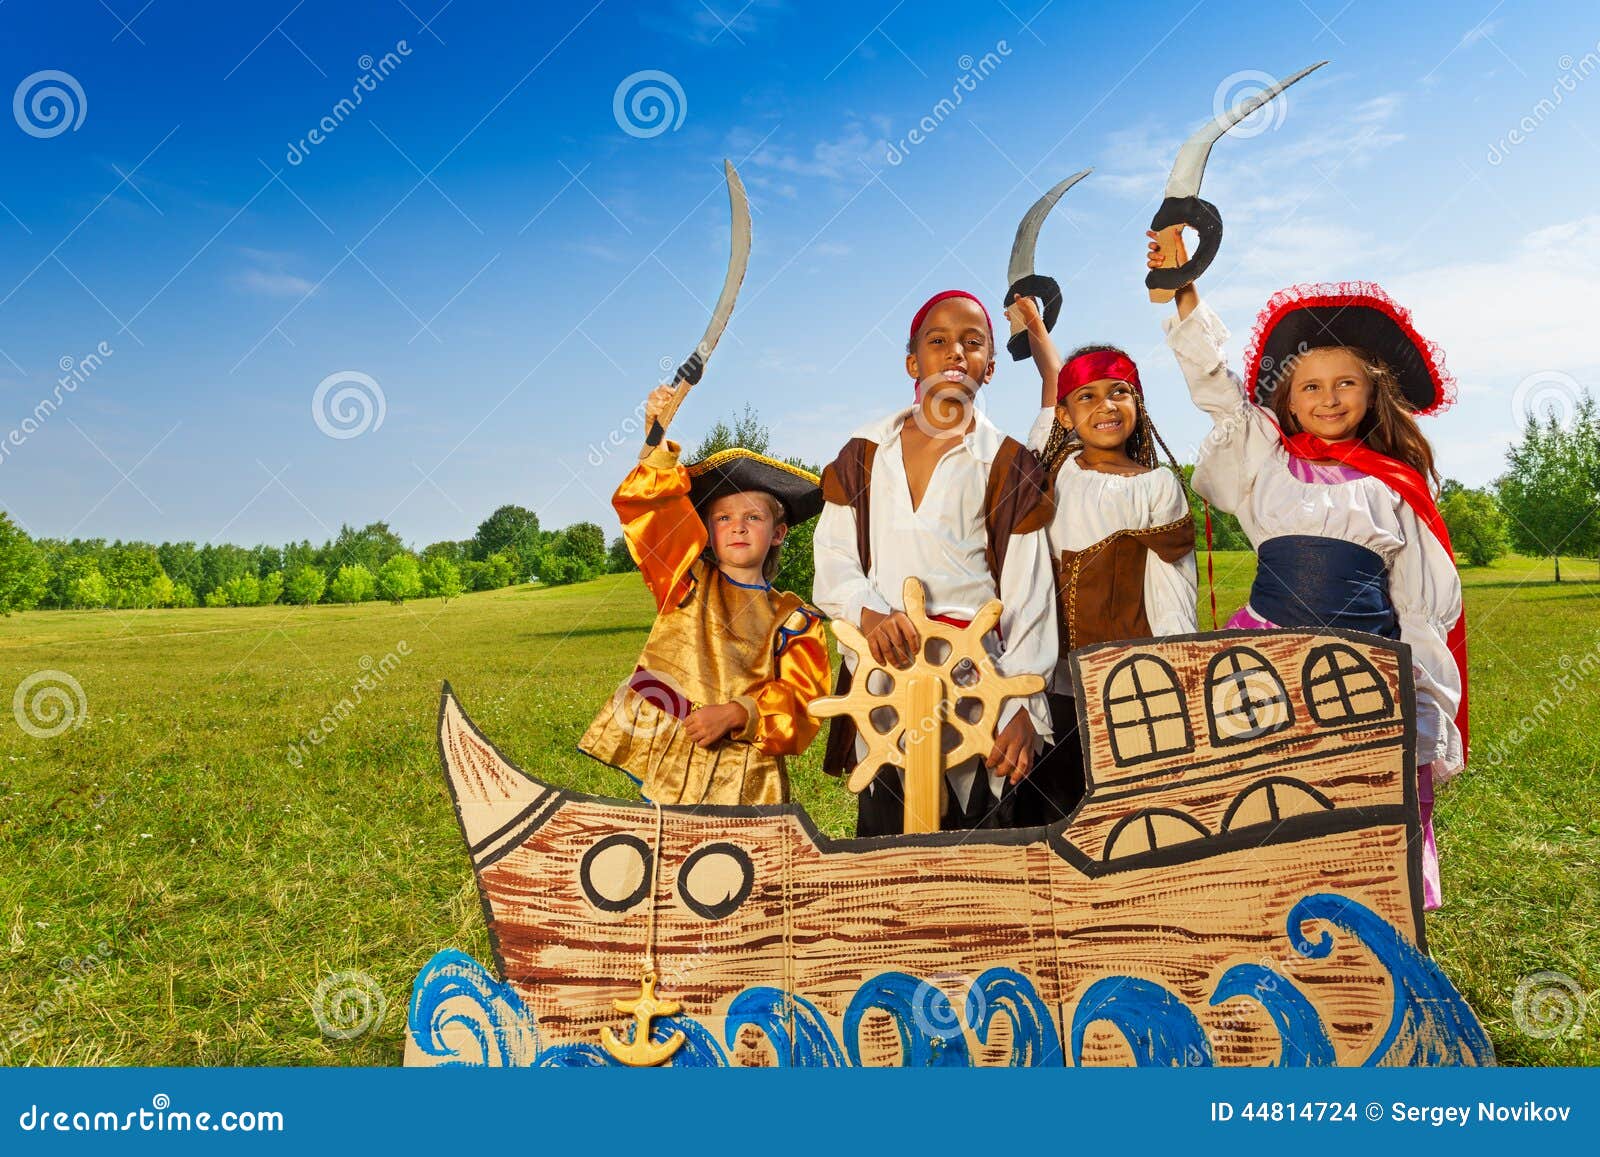 four kids in pirate costumes behind ship